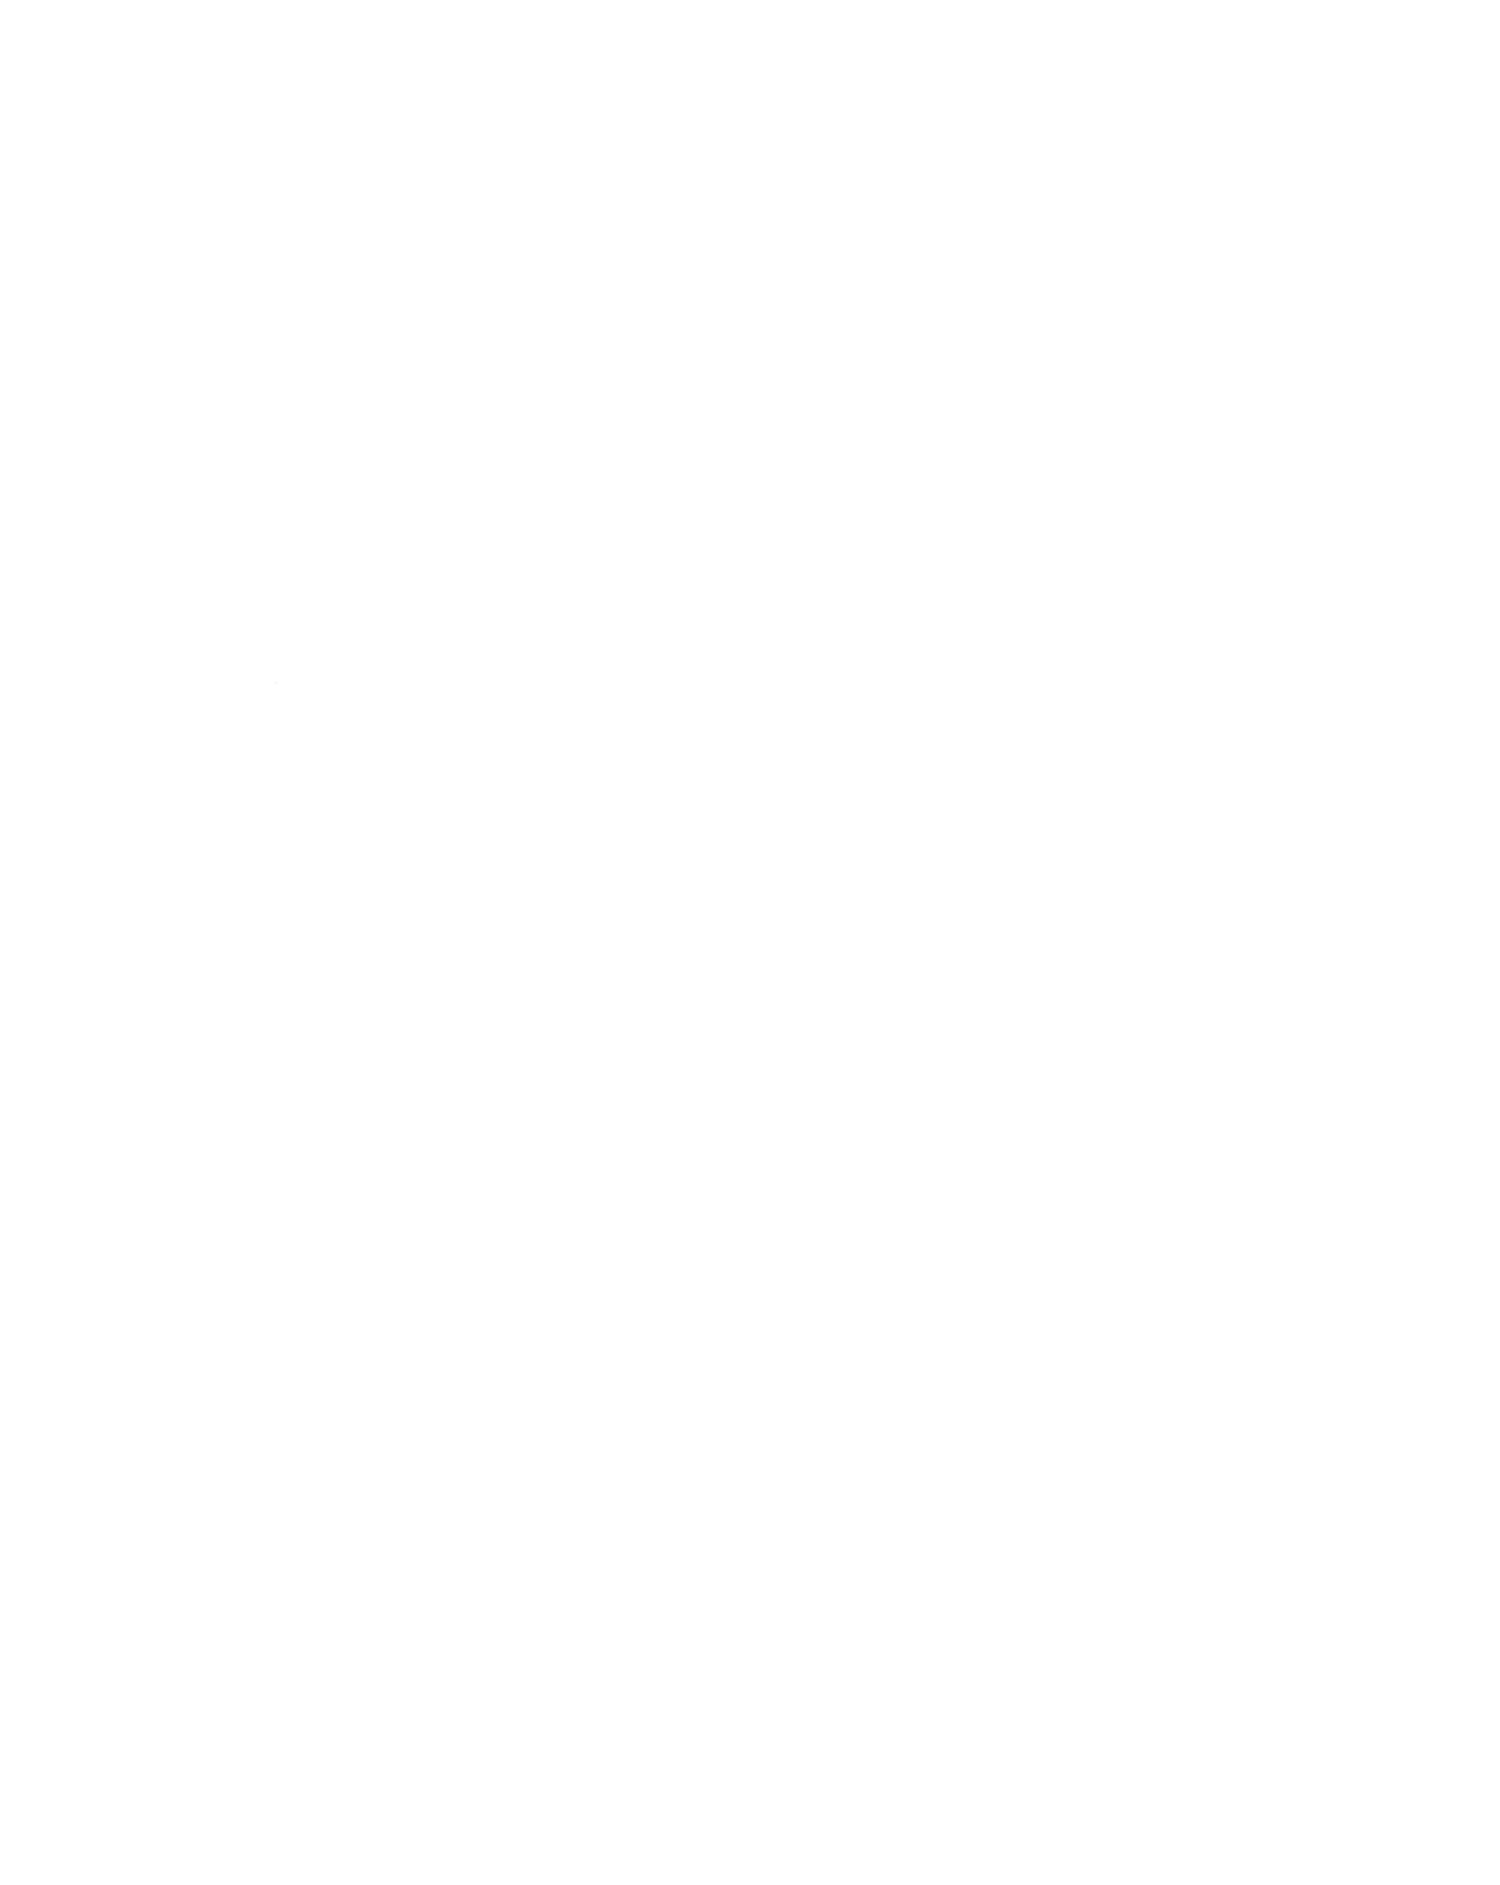 Join the Anchorage Police Department